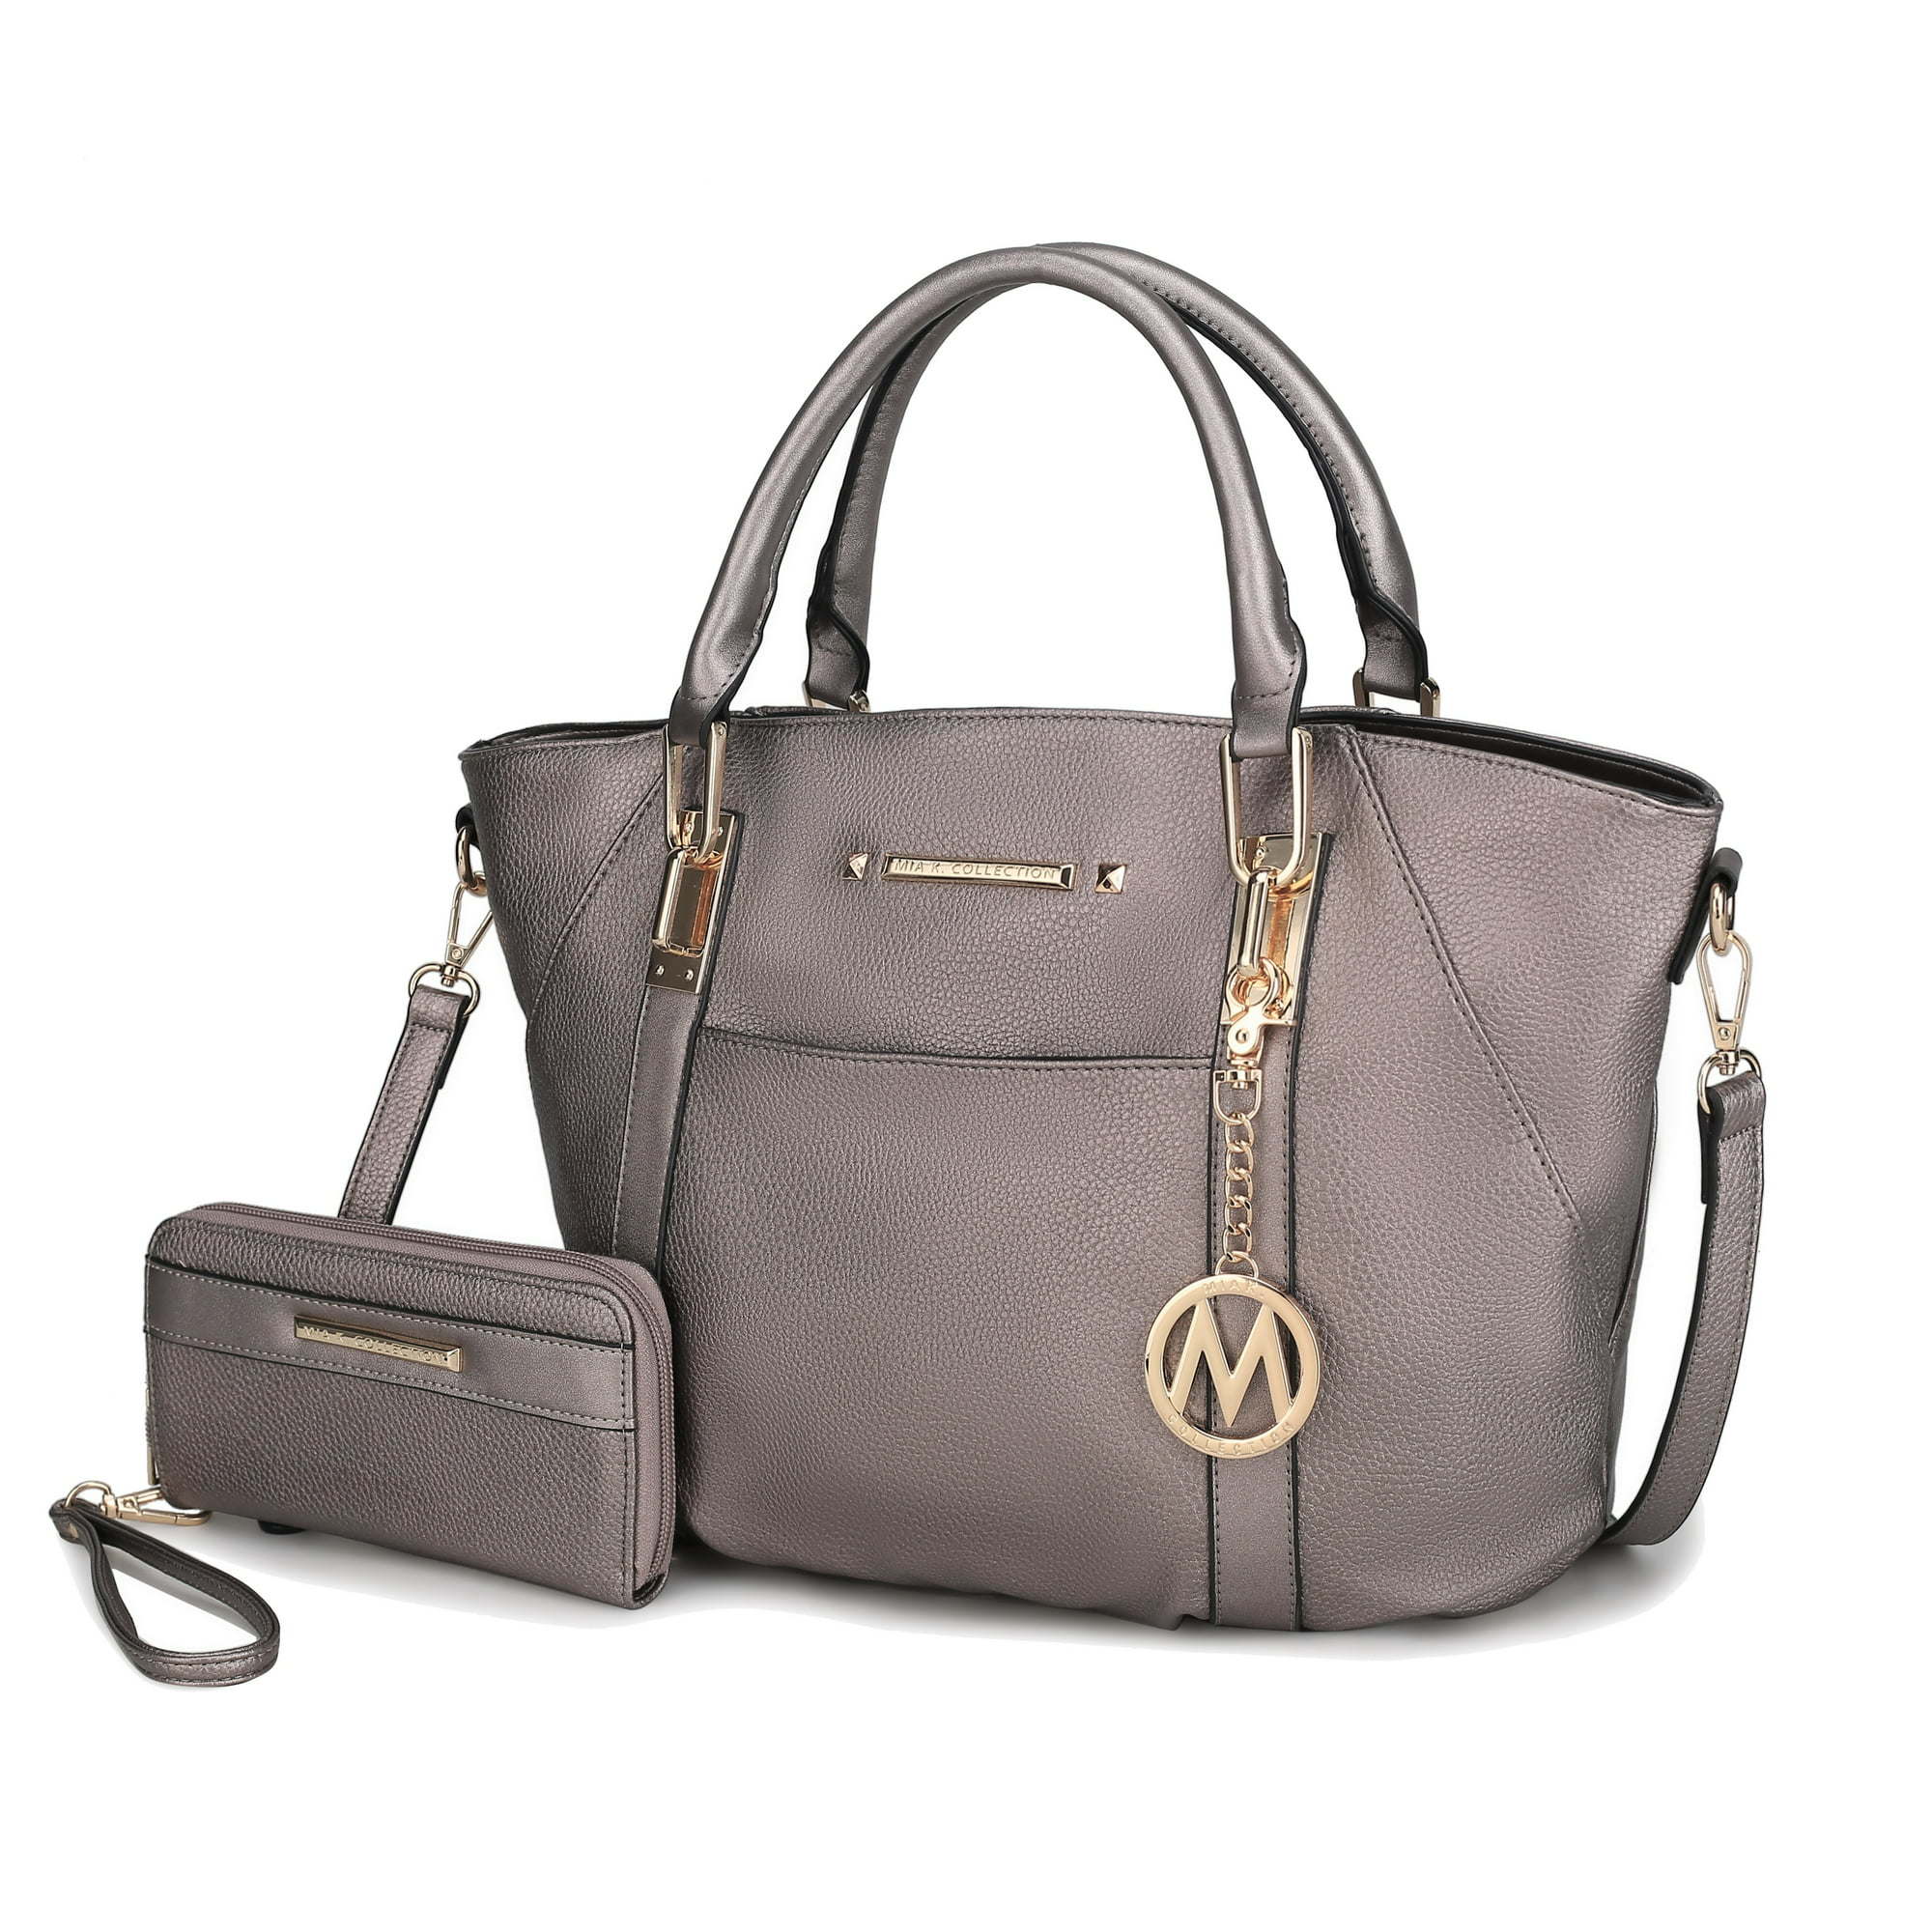 MKF Collection - Darielle Vegan Leather Satchel Bag with Wallet by Mia K. 2 Pieces - Pewter 3P's Inclusive Beauty